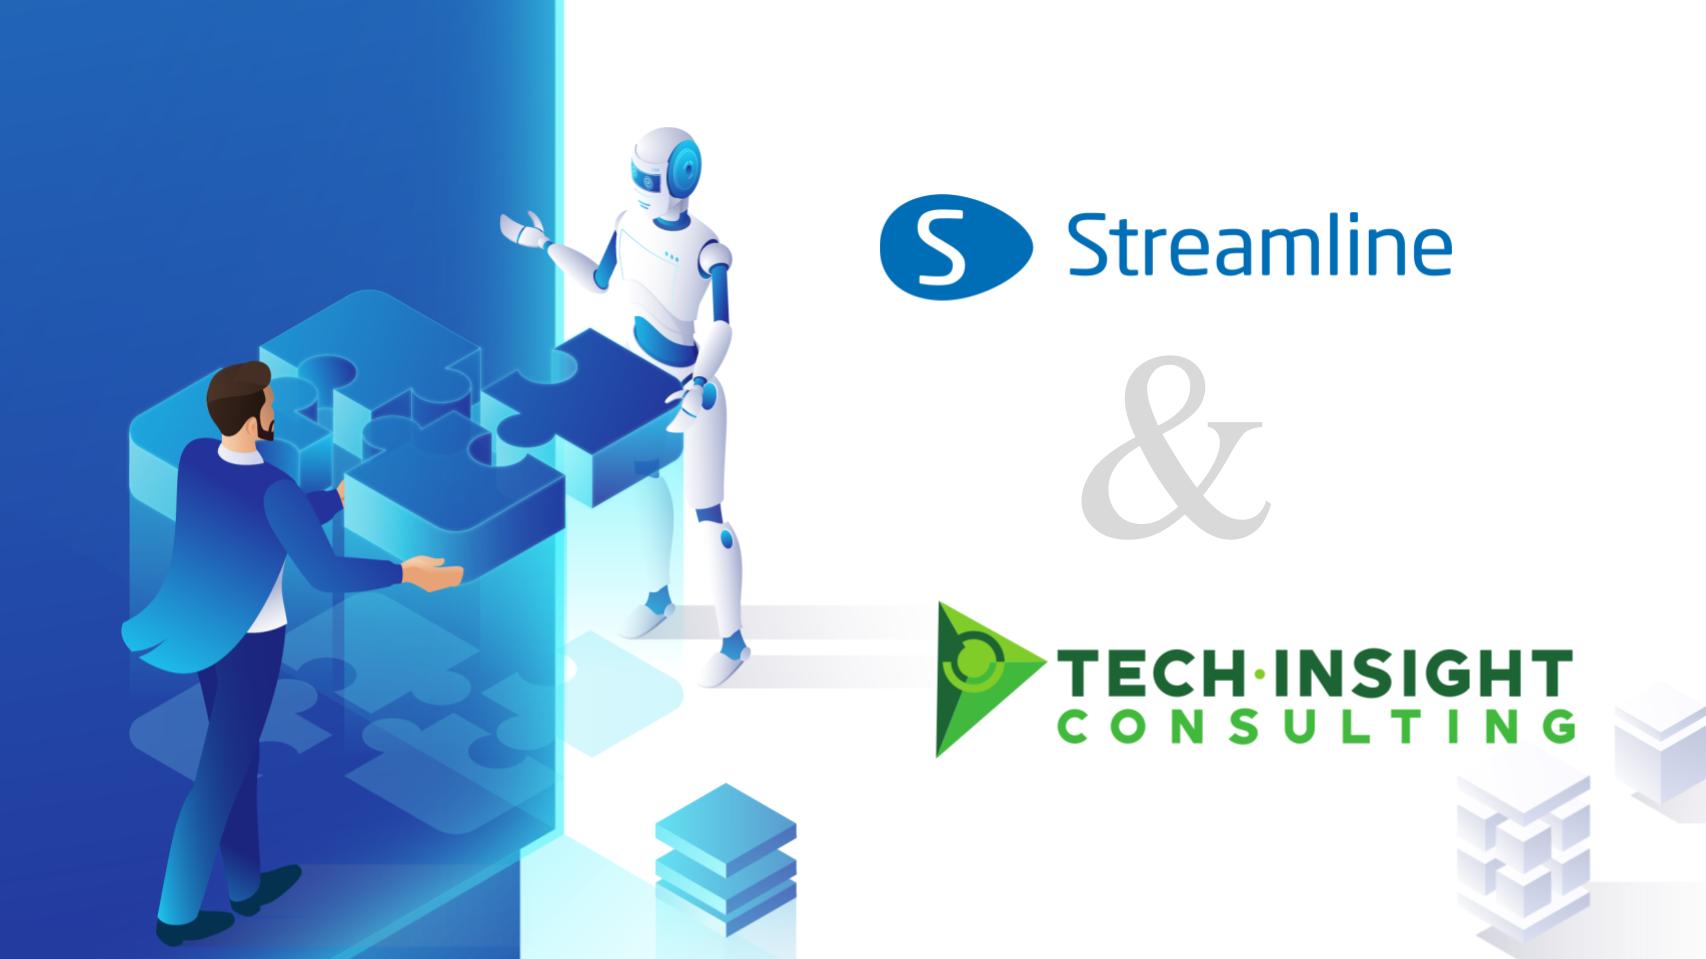 GMDH Streamline and Tech Insight Consulting announce a strategic partnership